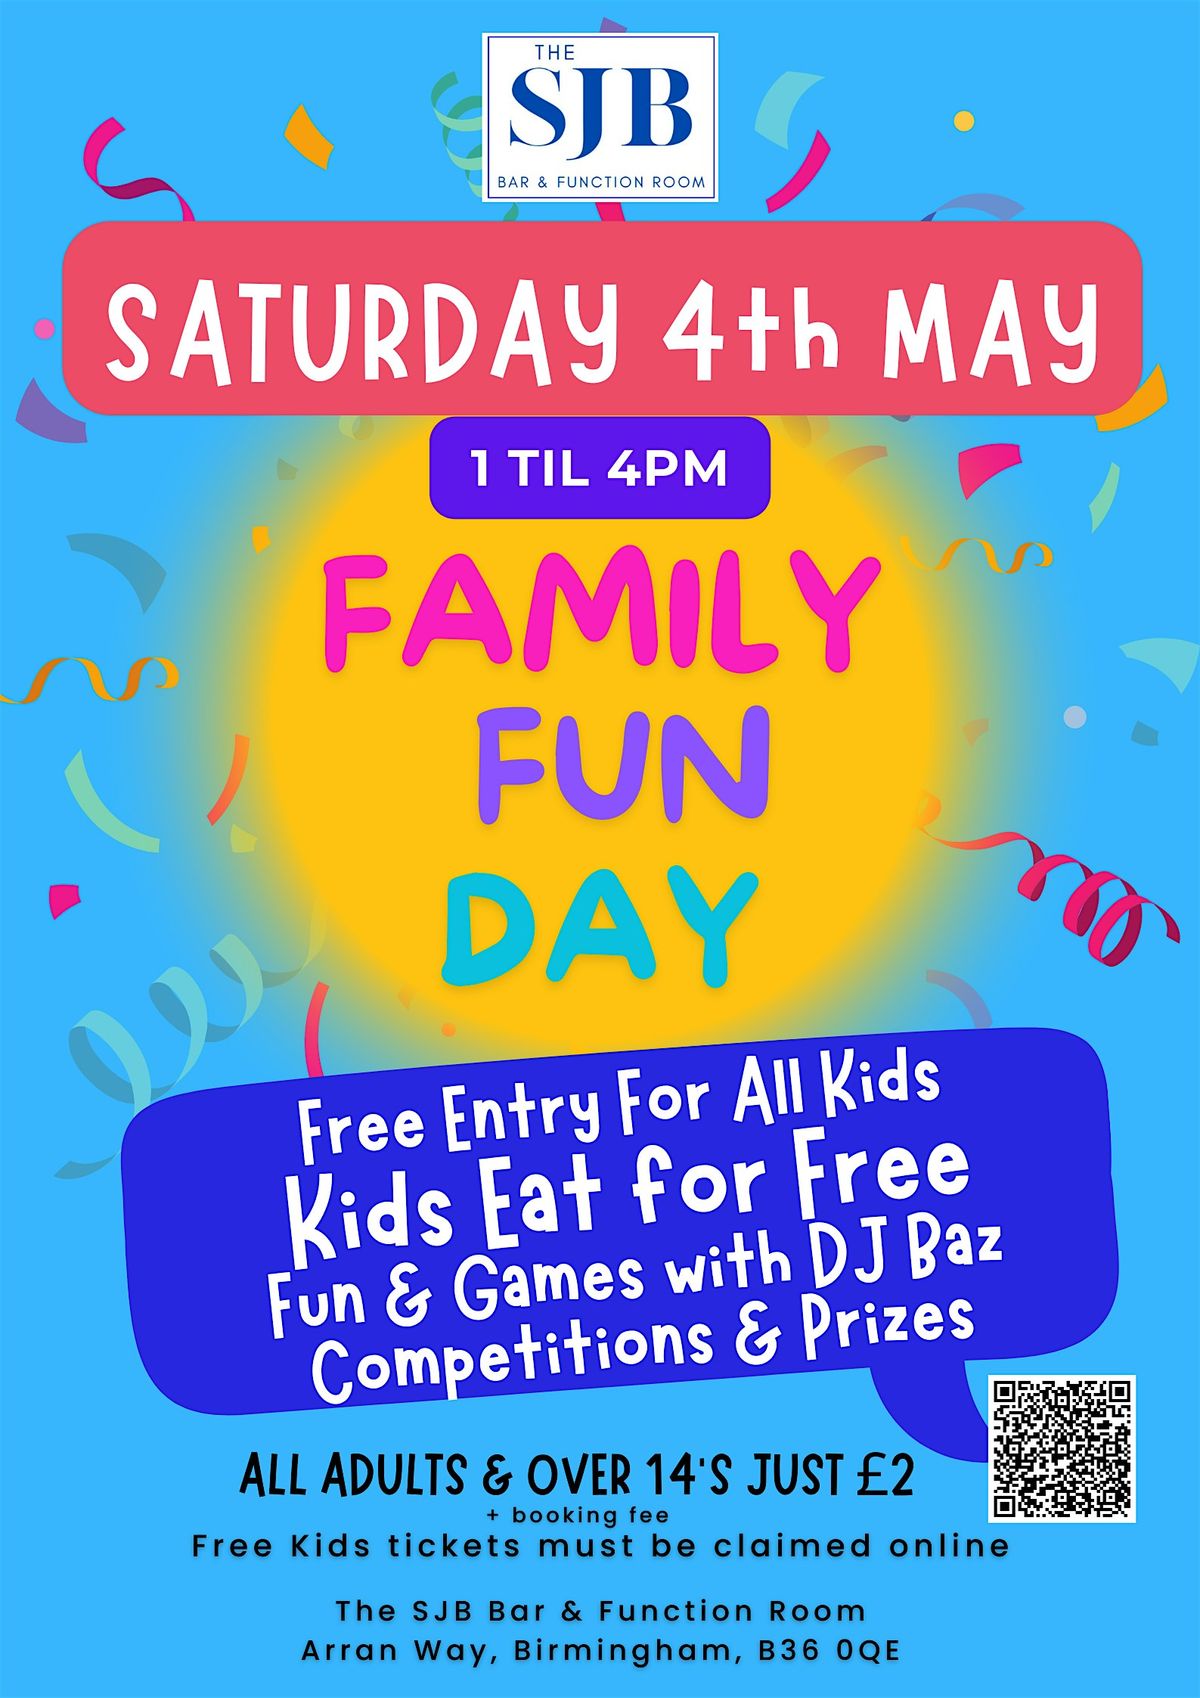 The SJB\u2019s Family Fun Day & Kids Eat For FREE, Saturday  4th May